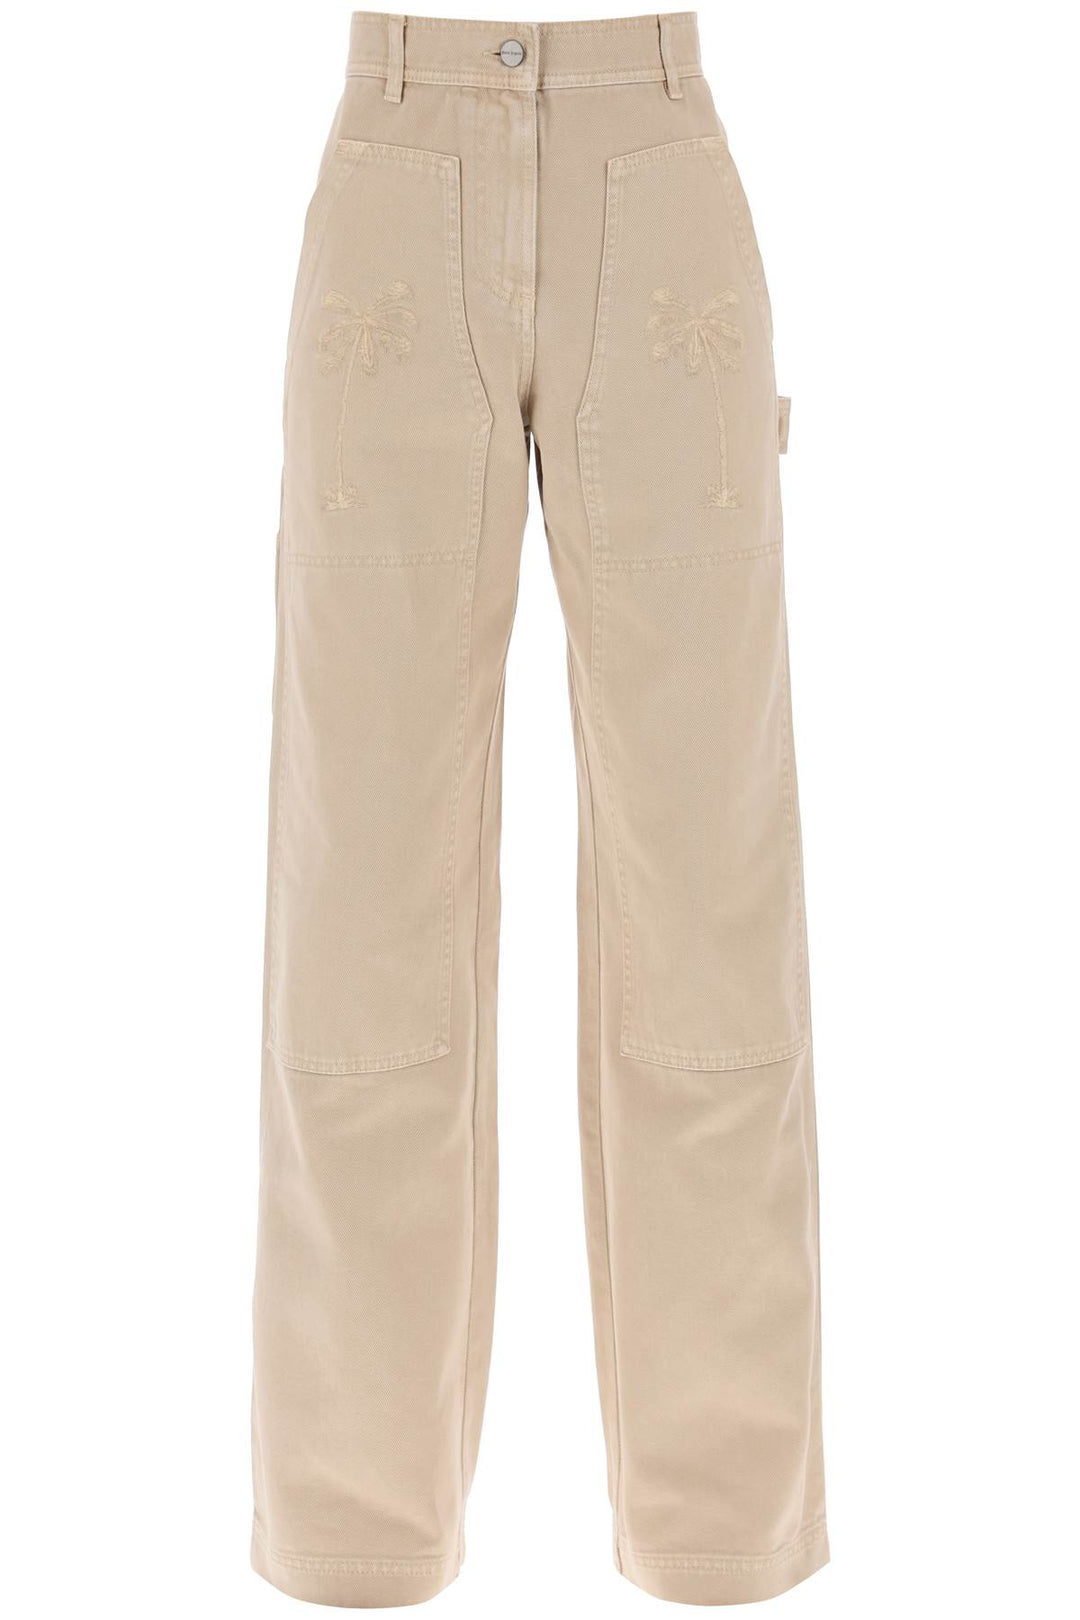 Palm Angels 'Gd Bull' Cargo Pants With Embroidered Palm Trees   Beige